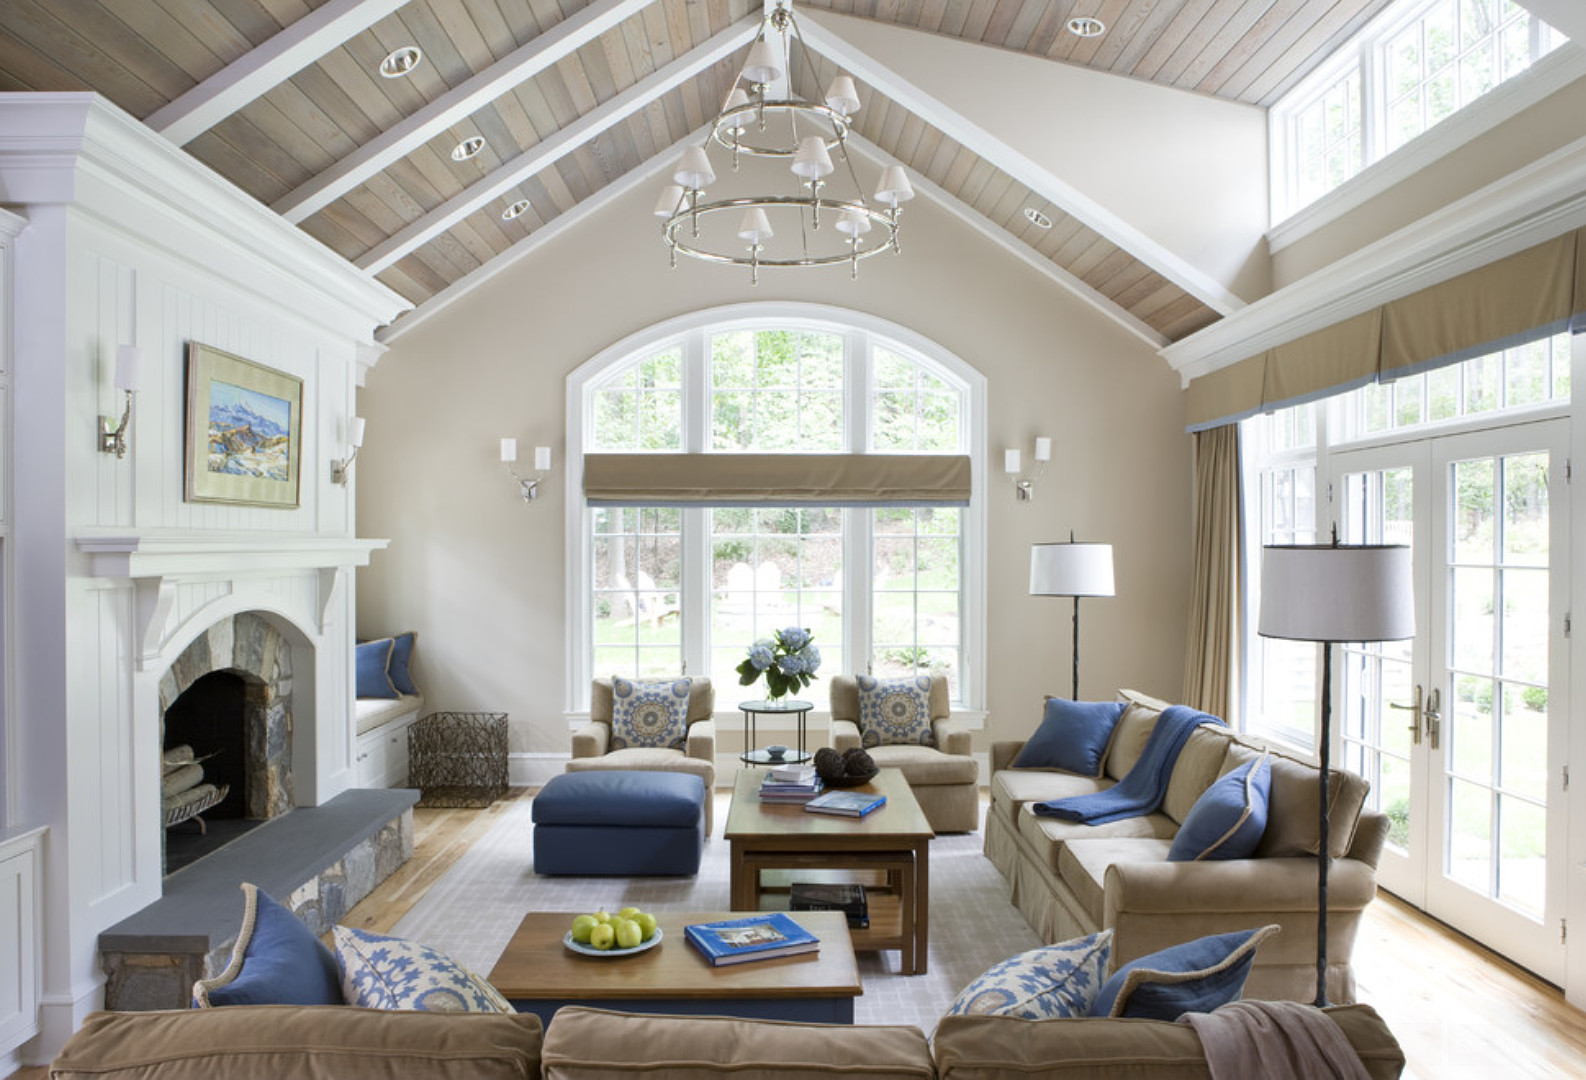 Living Room. Vaulted Ceiling Living Room Ideas. Living Room with vaulted ceiling, planks and rafters. #LivingRoom #VaultedCeiling #ExposedRafters #LivingRoomRafters #PlankCeiling Celia Welch Interiors.